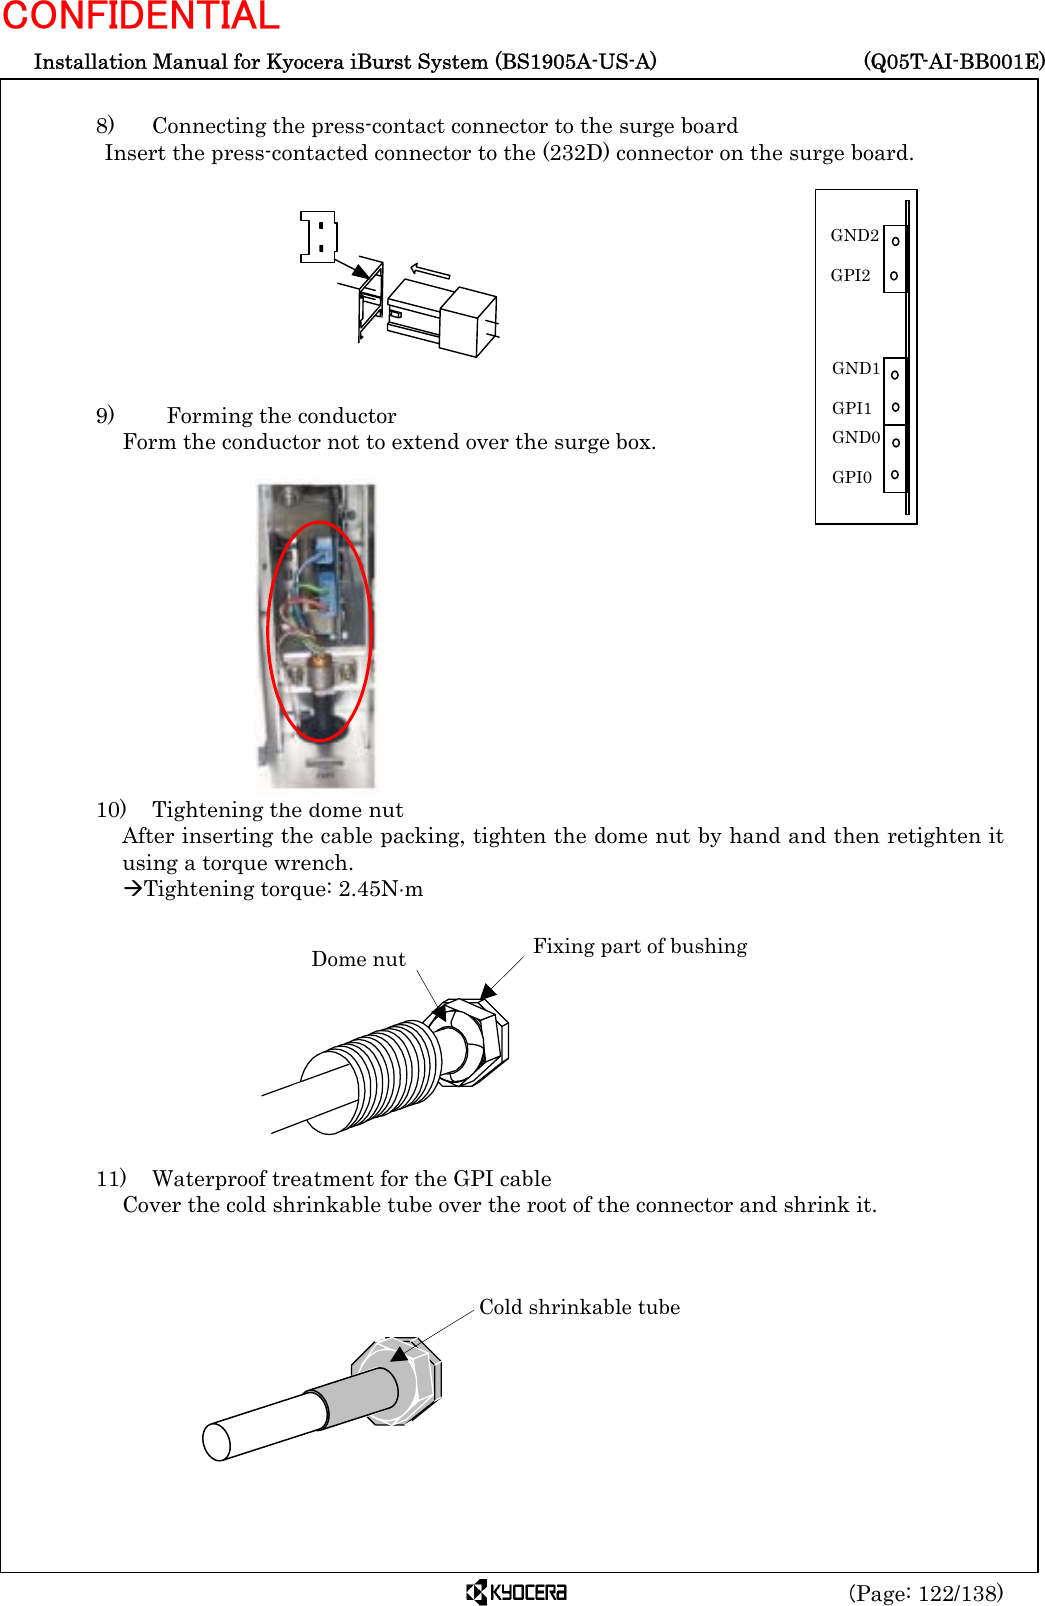  Installation Manual for Kyocera iBurst System (BS1905A-US-A)     (Q05T-AI-BB001E) (Page: 122/138) CONFIDENTIAL  8)   Connecting the press-contact connector to the surge board Insert the press-contacted connector to the (232D) connector on the surge board.          9)    Forming the conductor Form the conductor not to extend over the surge box.              10)    Tightening the dome nut After inserting the cable packing, tighten the dome nut by hand and then retighten it using a torque wrench. ÆTightening torque: 2.45N⋅m           11)    Waterproof treatment for the GPI cable Cover the cold shrinkable tube over the root of the connector and shrink it.           Dome nut  Fixing part of bushing Cold shrinkable tube GND0  GPI0 GND1  GPI1 GND2  GPI2 